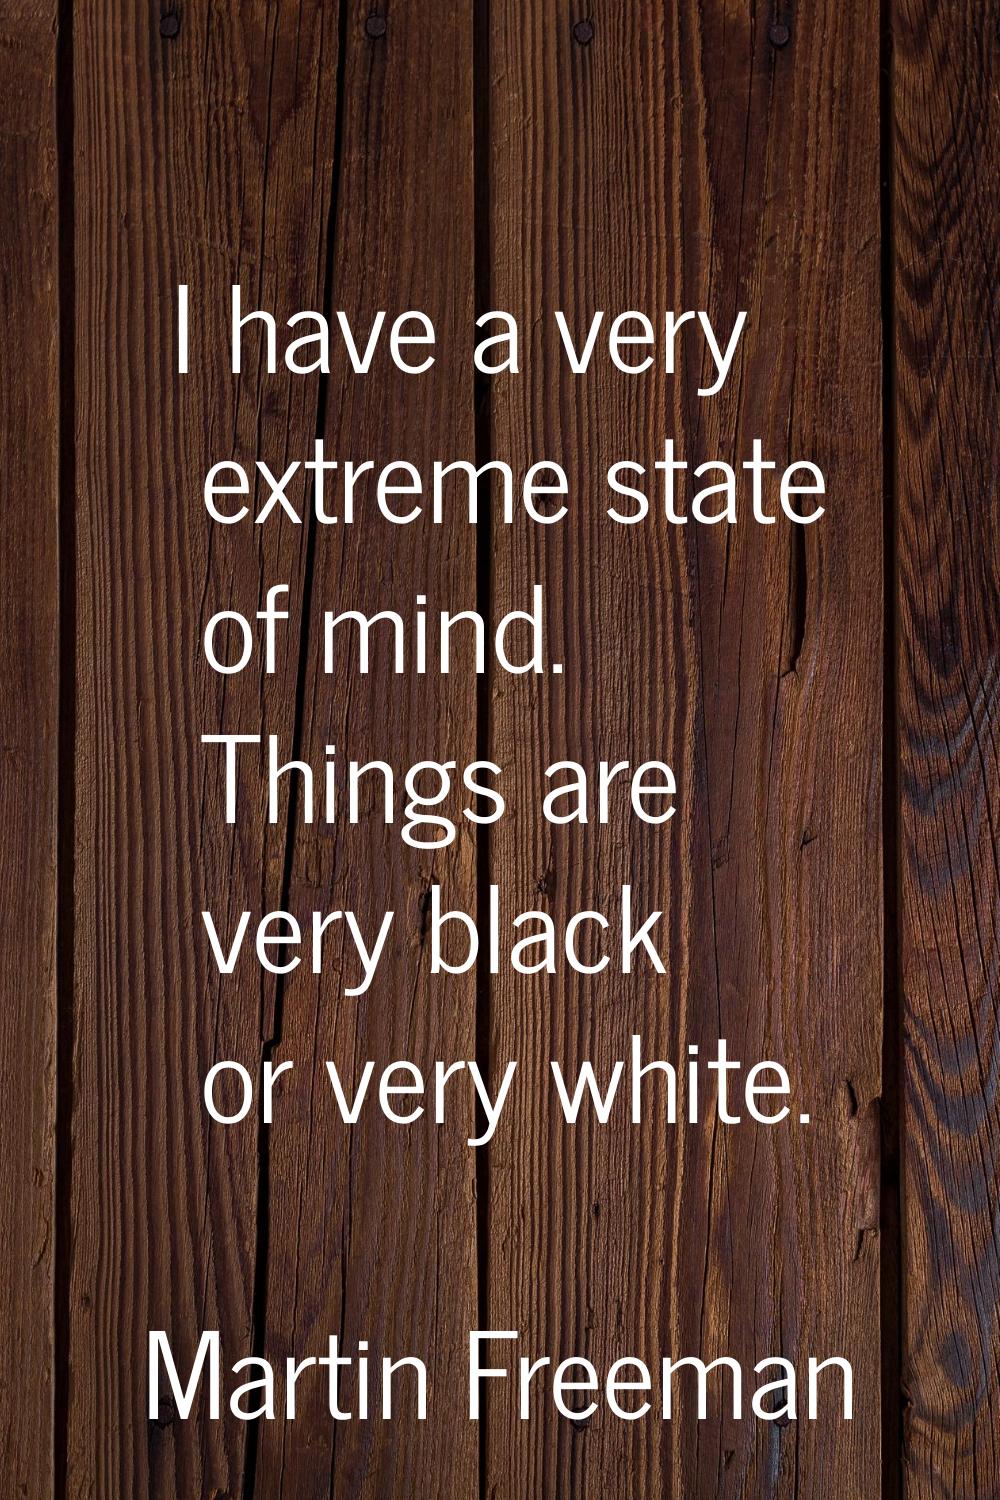 I have a very extreme state of mind. Things are very black or very white.